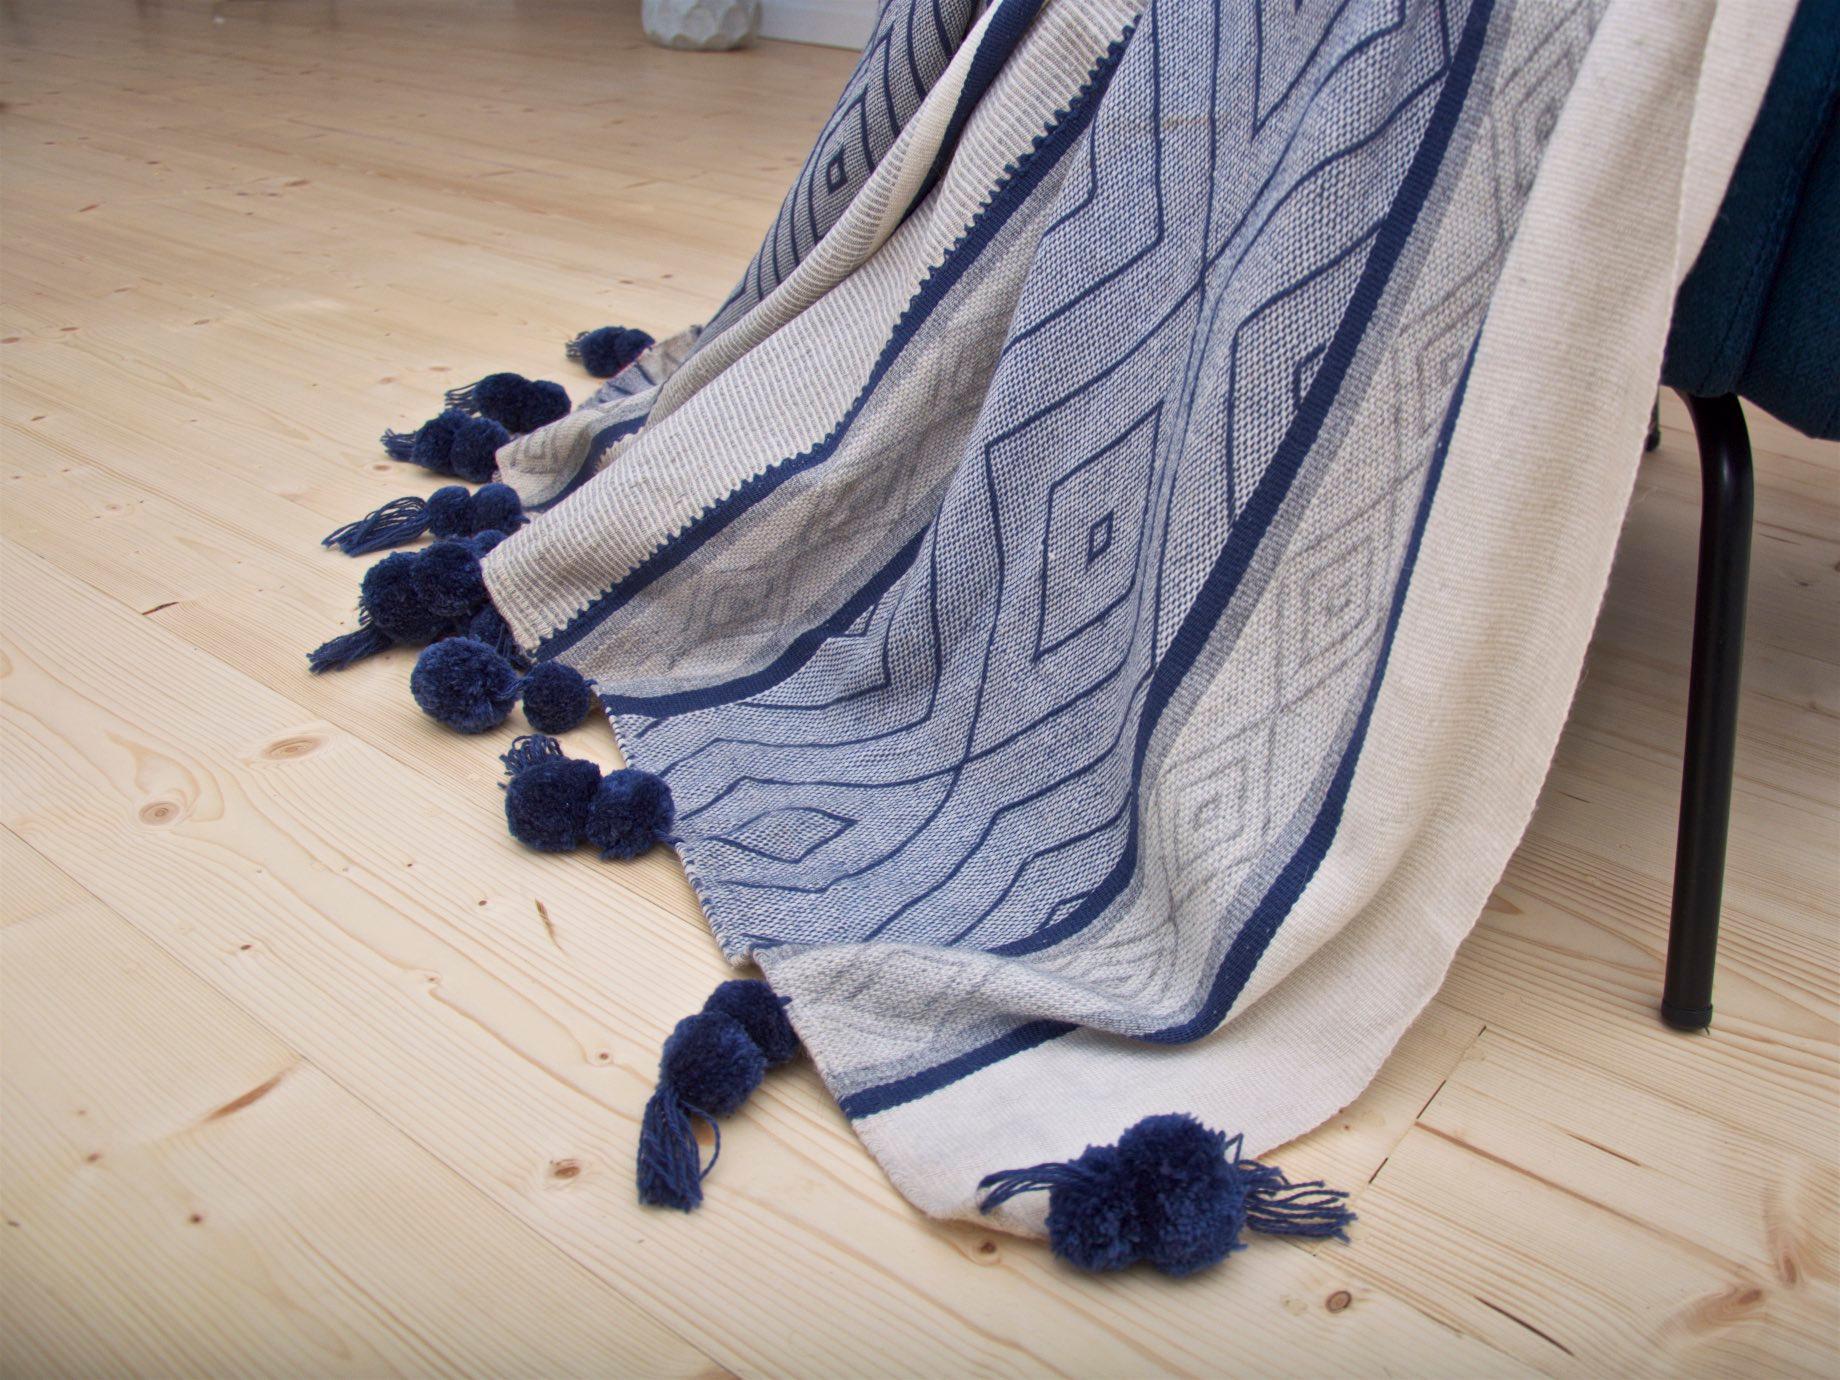 This blue Oasis Alpaca large throw can be used as a blanket or as a picnic rug, designed by artisan Racio Del Barco in Cuzco and hand-loomed by women weavers in a remote community, Ollantaytambo, Peru. It is made of alpaca wool, hand spun yarn and